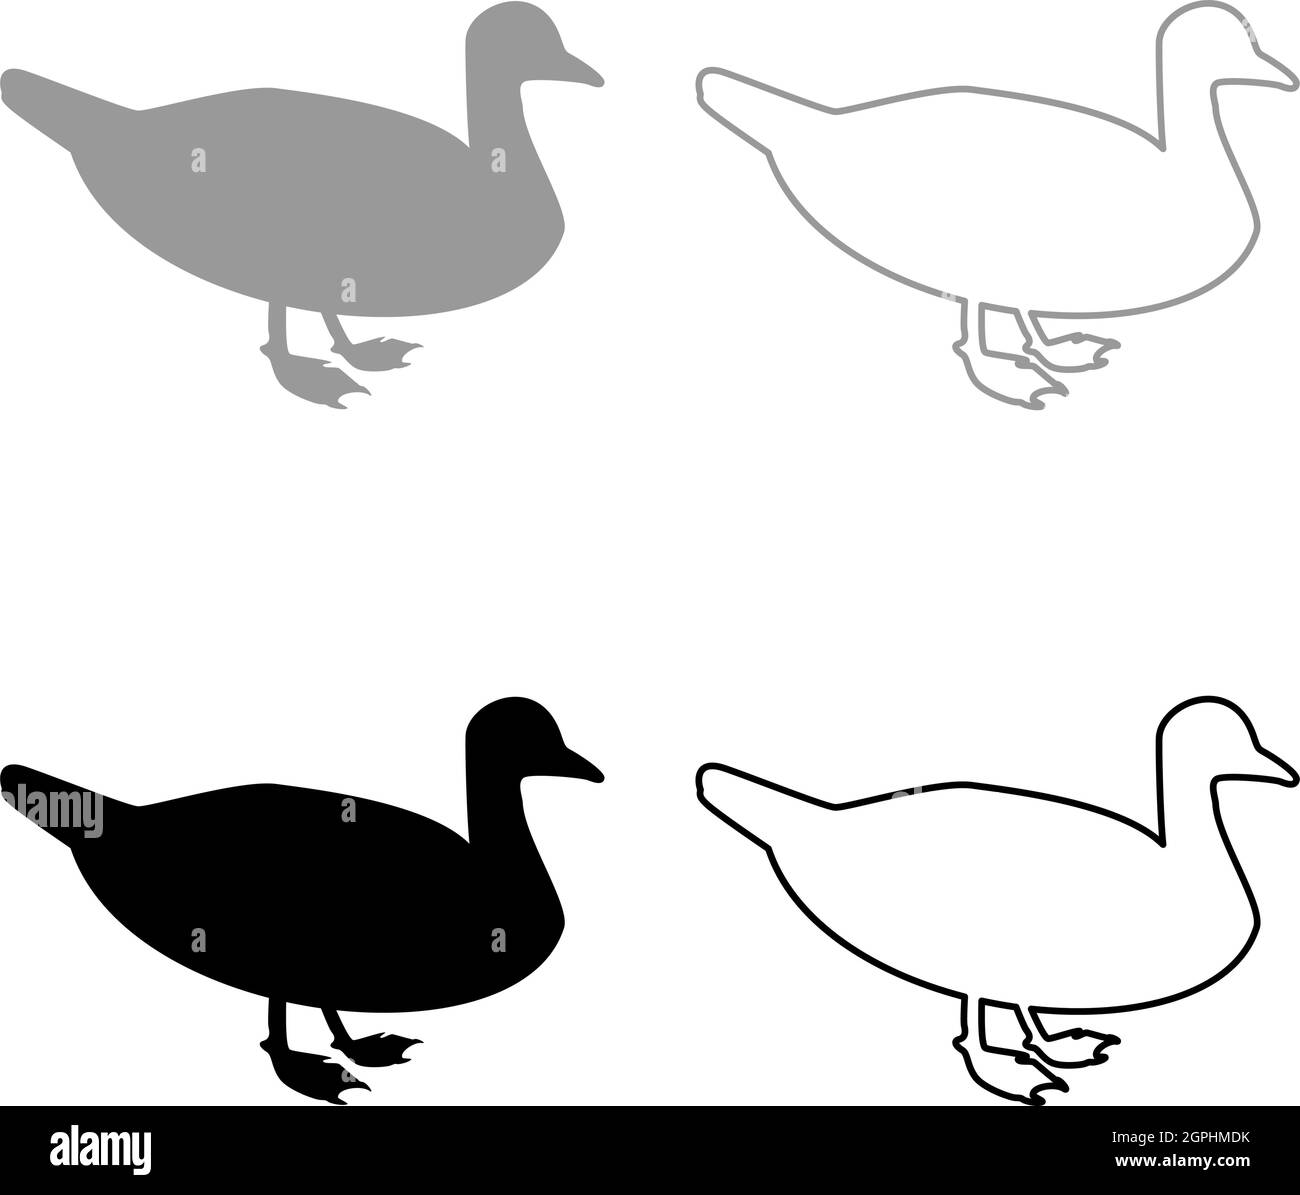 Duck Male mallard Bird Waterbird Waterfowl Poultry Fowl Canard silhouette grey black color vector illustration solid outline style image Stock Vector